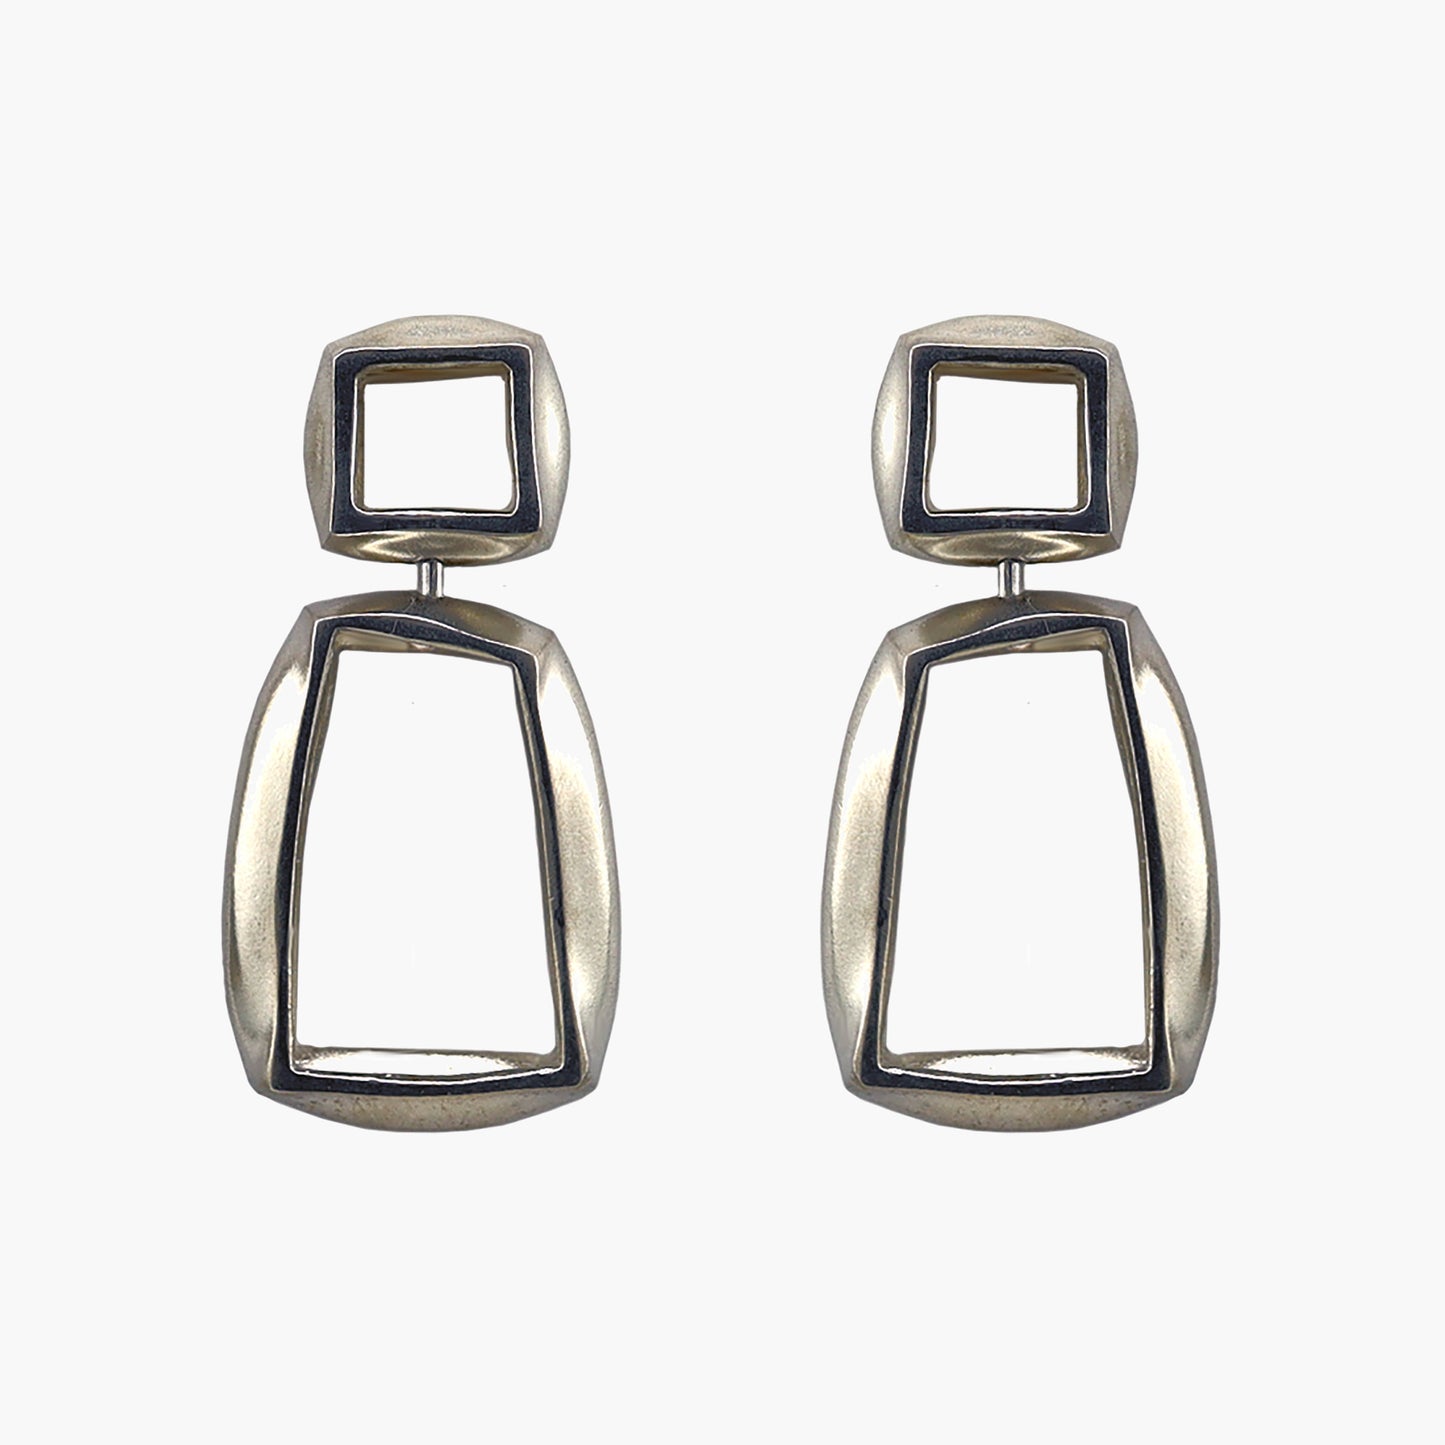 Sterling silver HANO earrings by Kim Paquet